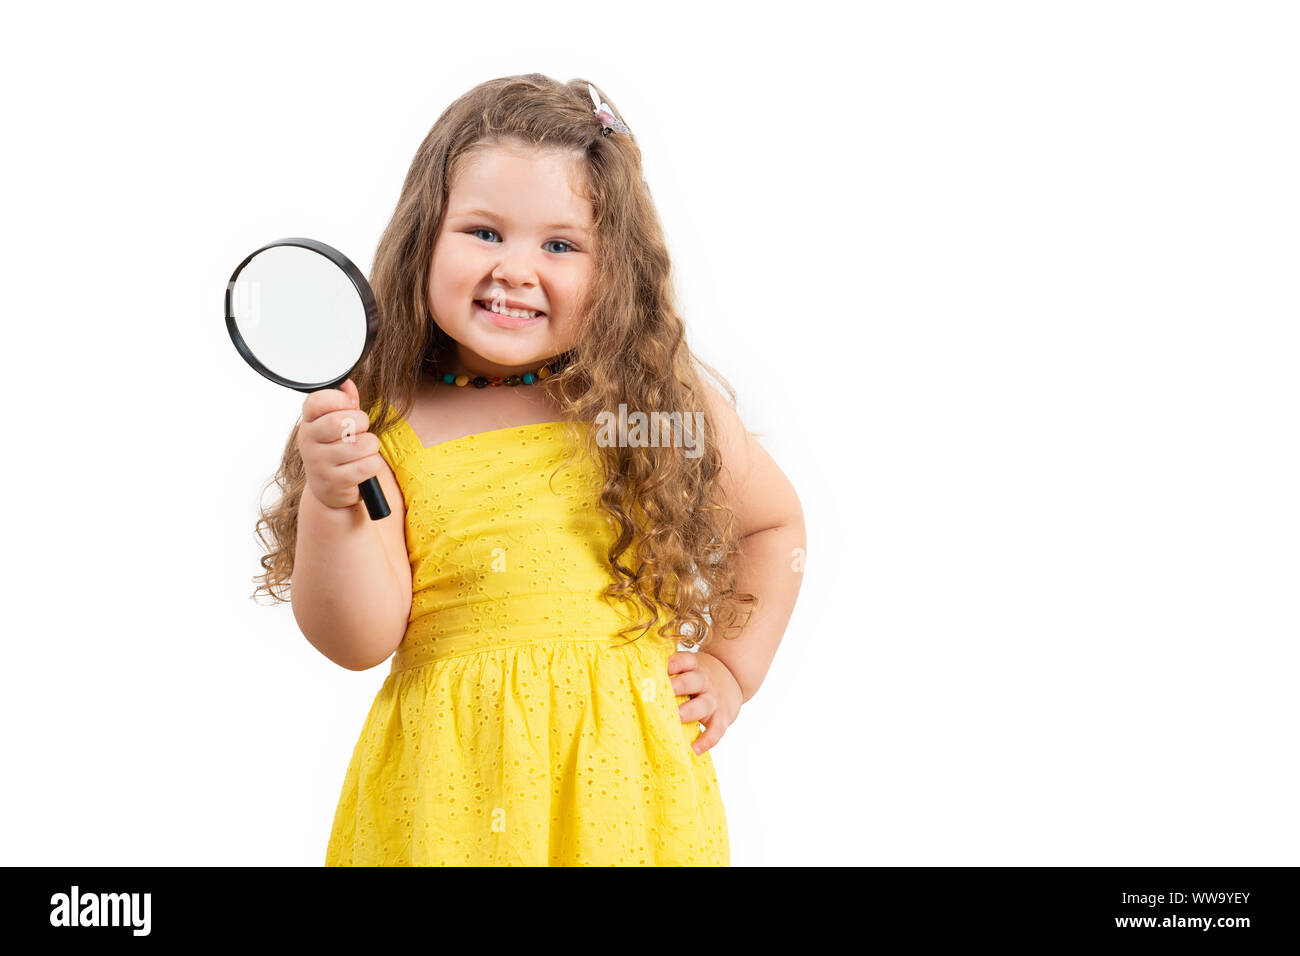 Little preschool girl holding magnifier and smiling on white background. Stock Photo